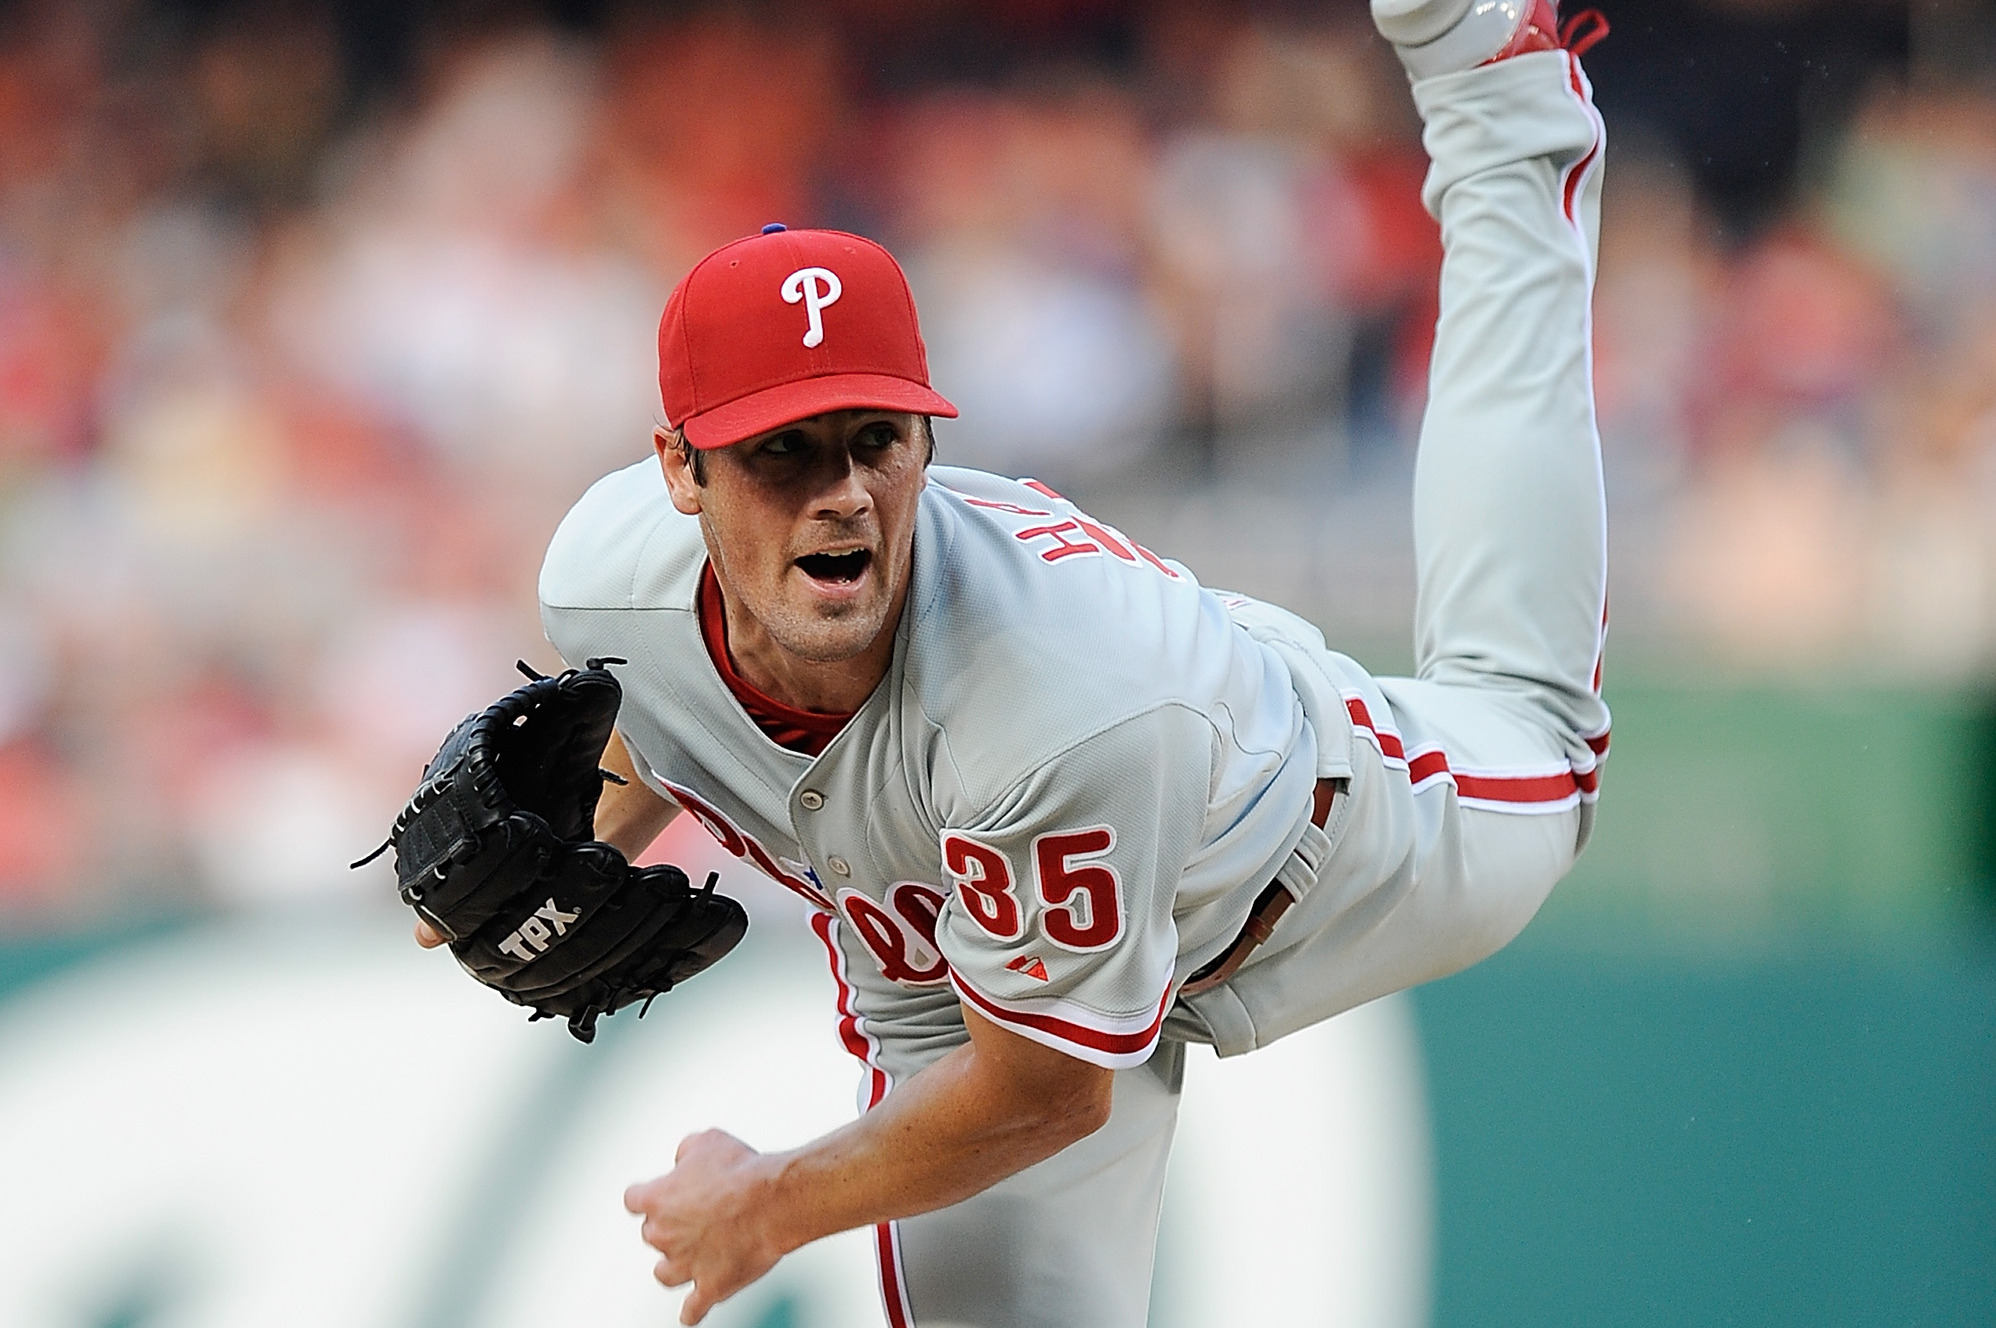 Say hey, baseball: Cole Hamels would refuse trade to Astros